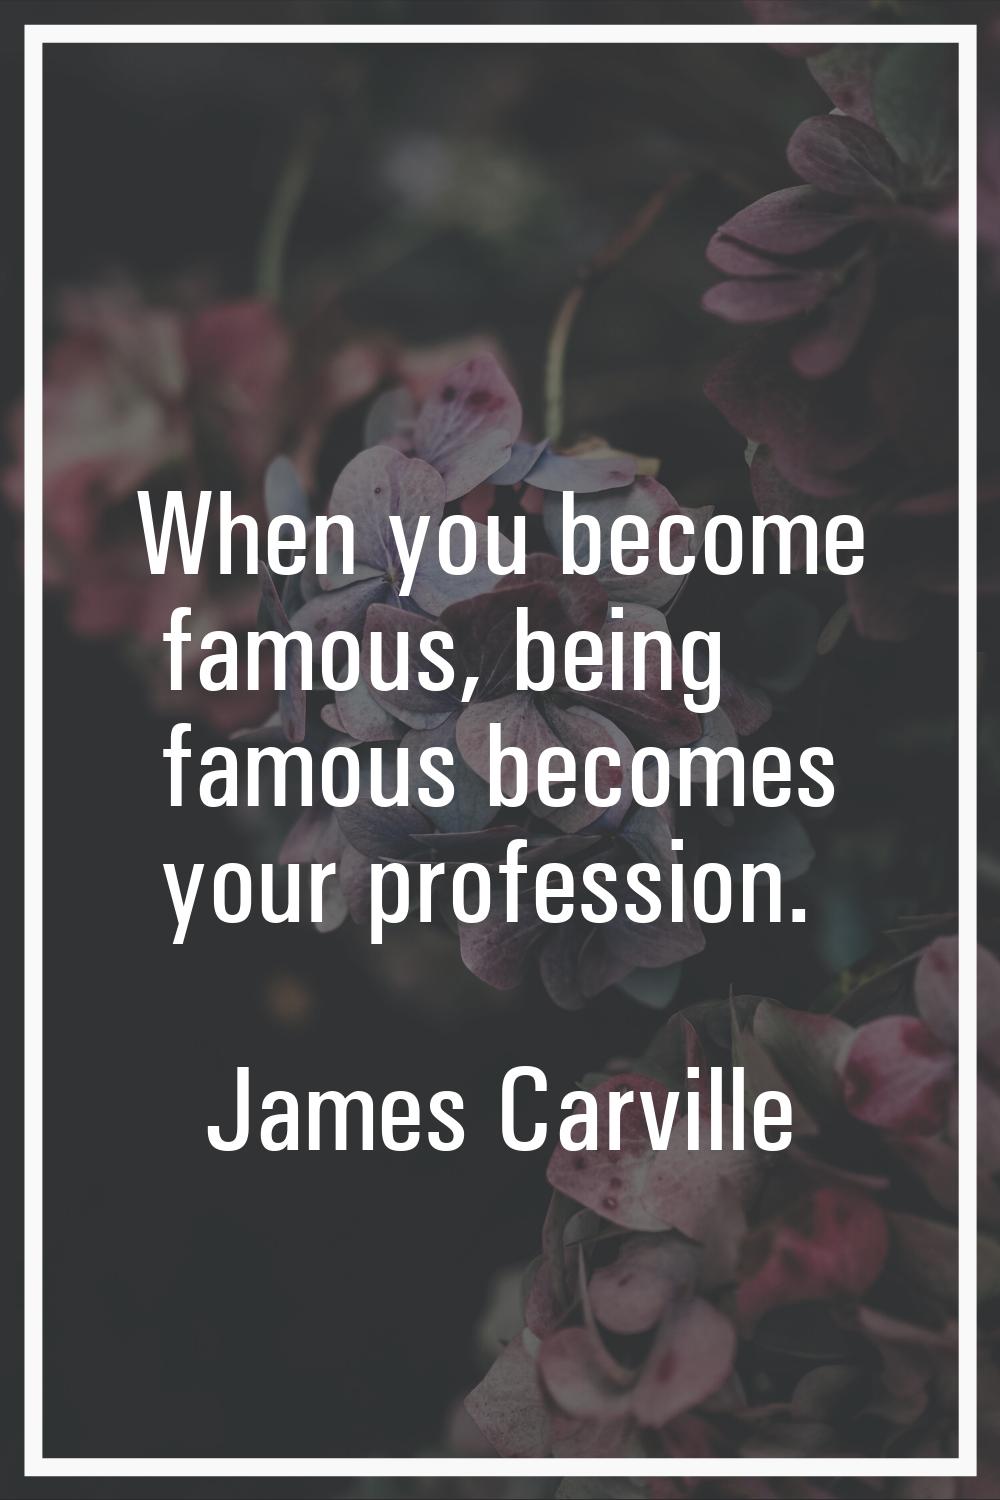 When you become famous, being famous becomes your profession.